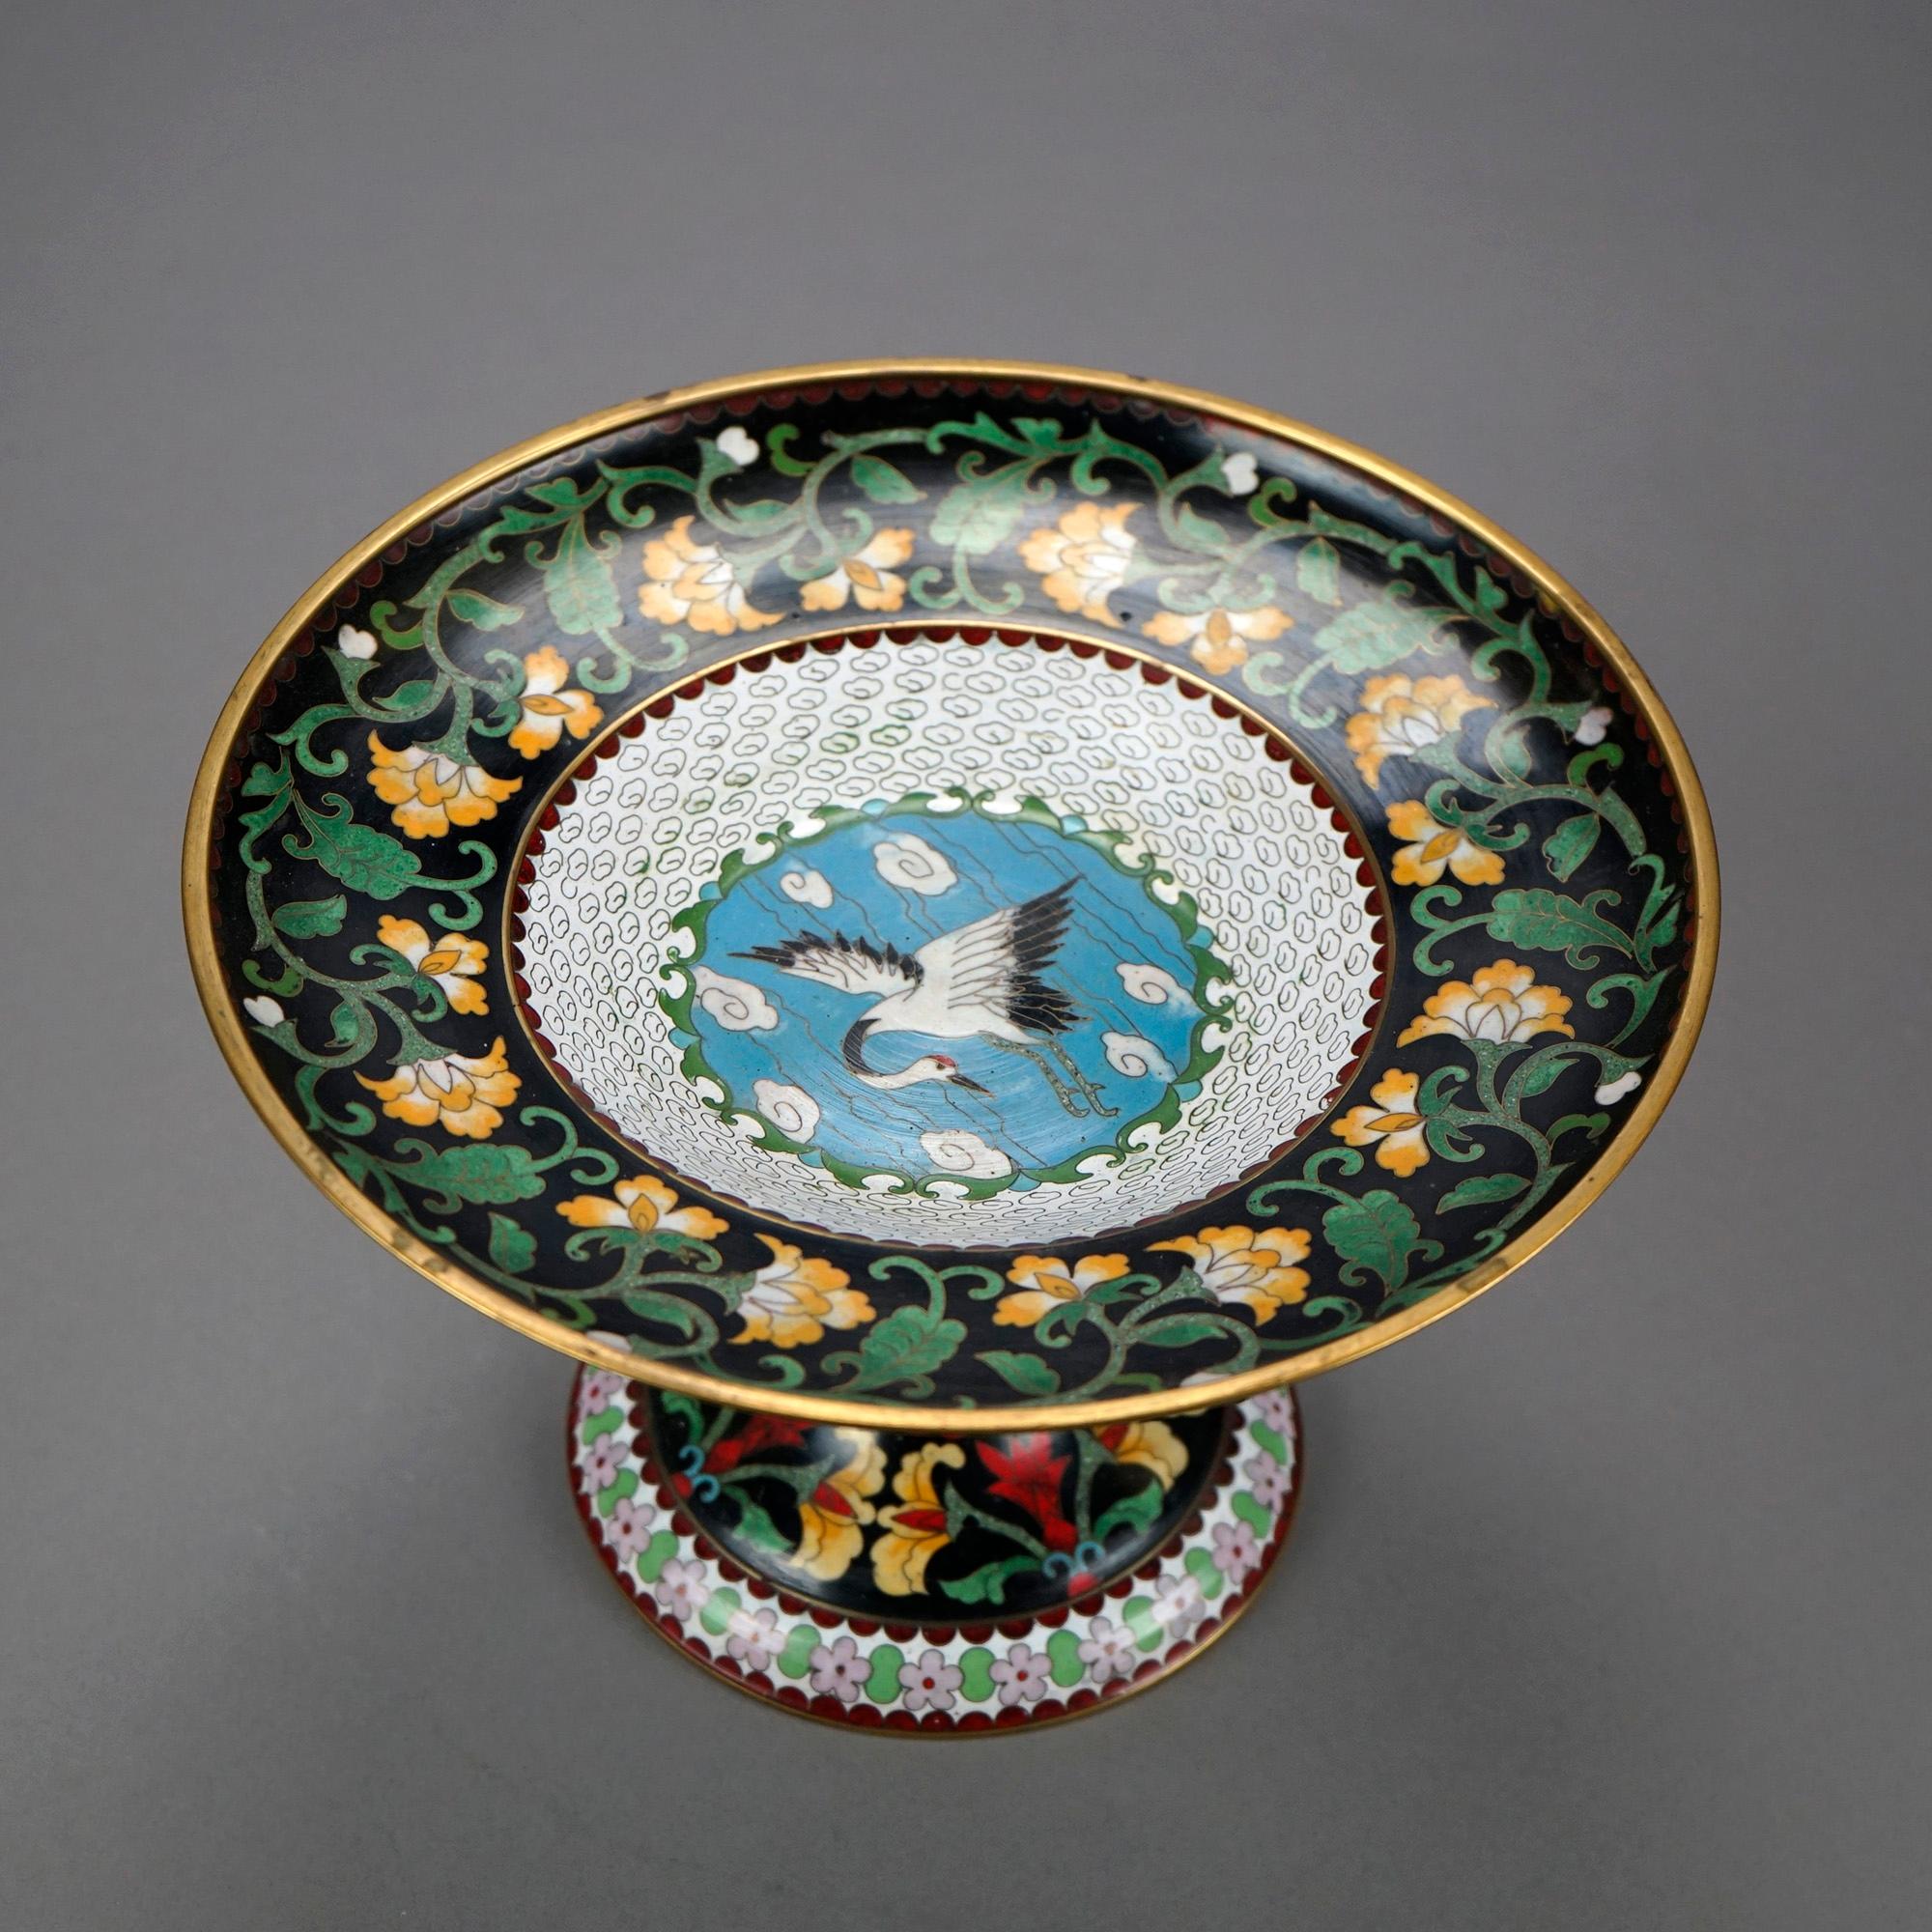 A Chinese Cloisonne compote offers enamel decorated construction with bowl having central swan (or heron) in marsh setting with floral bordering, raised on flared pedestal, c1930

Measures- 6.5''H x 10.25''W x 10.25''D

Catalogue Note: Ask about